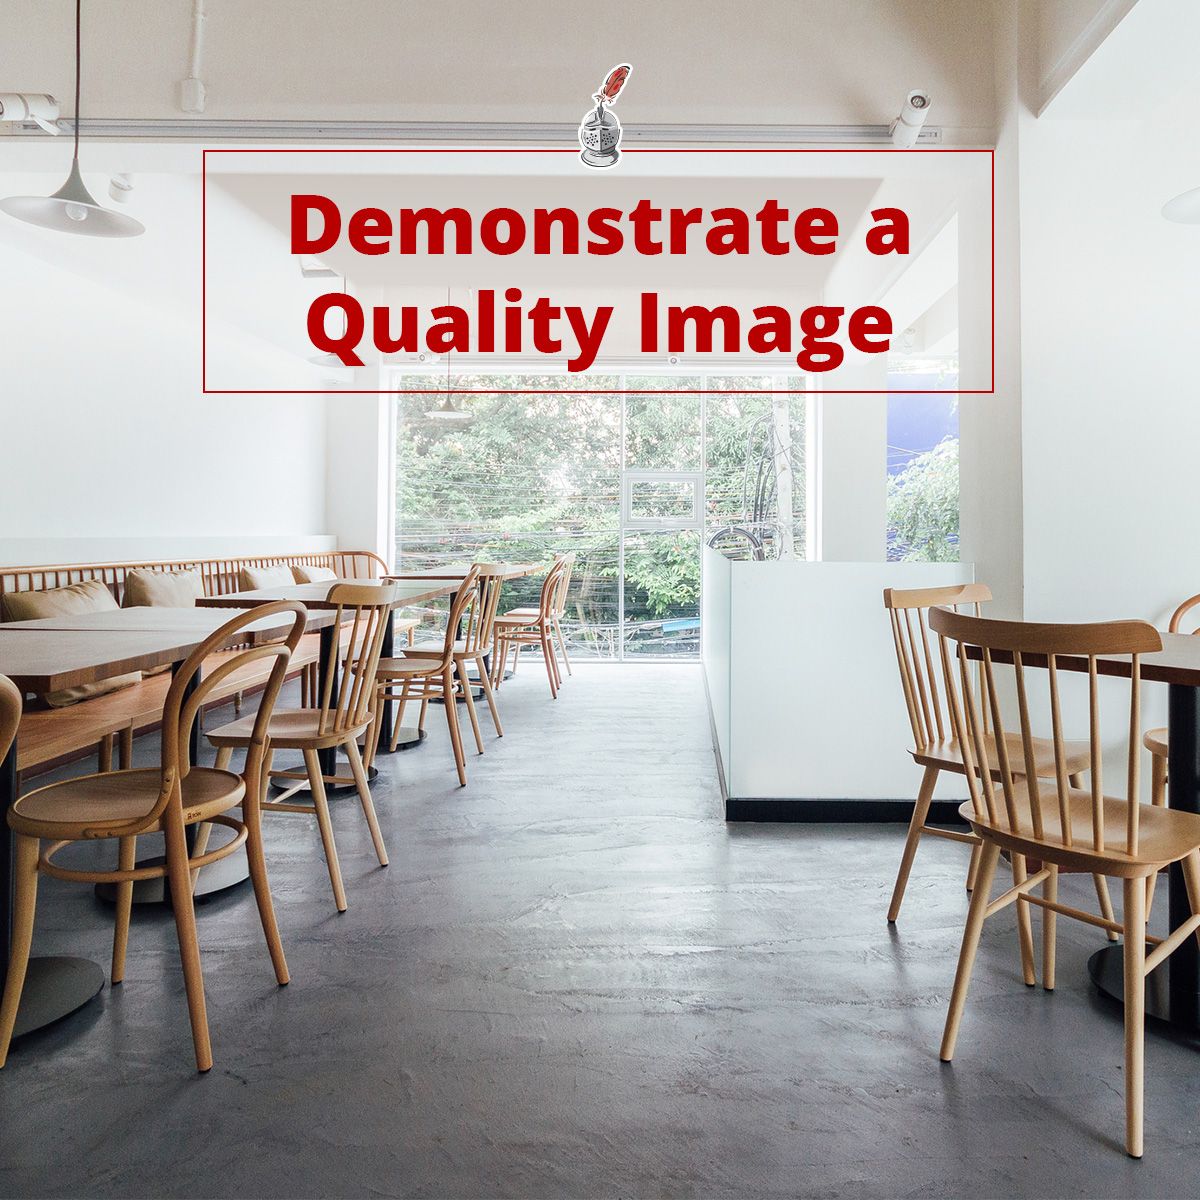 Demonstrate a Quality Image